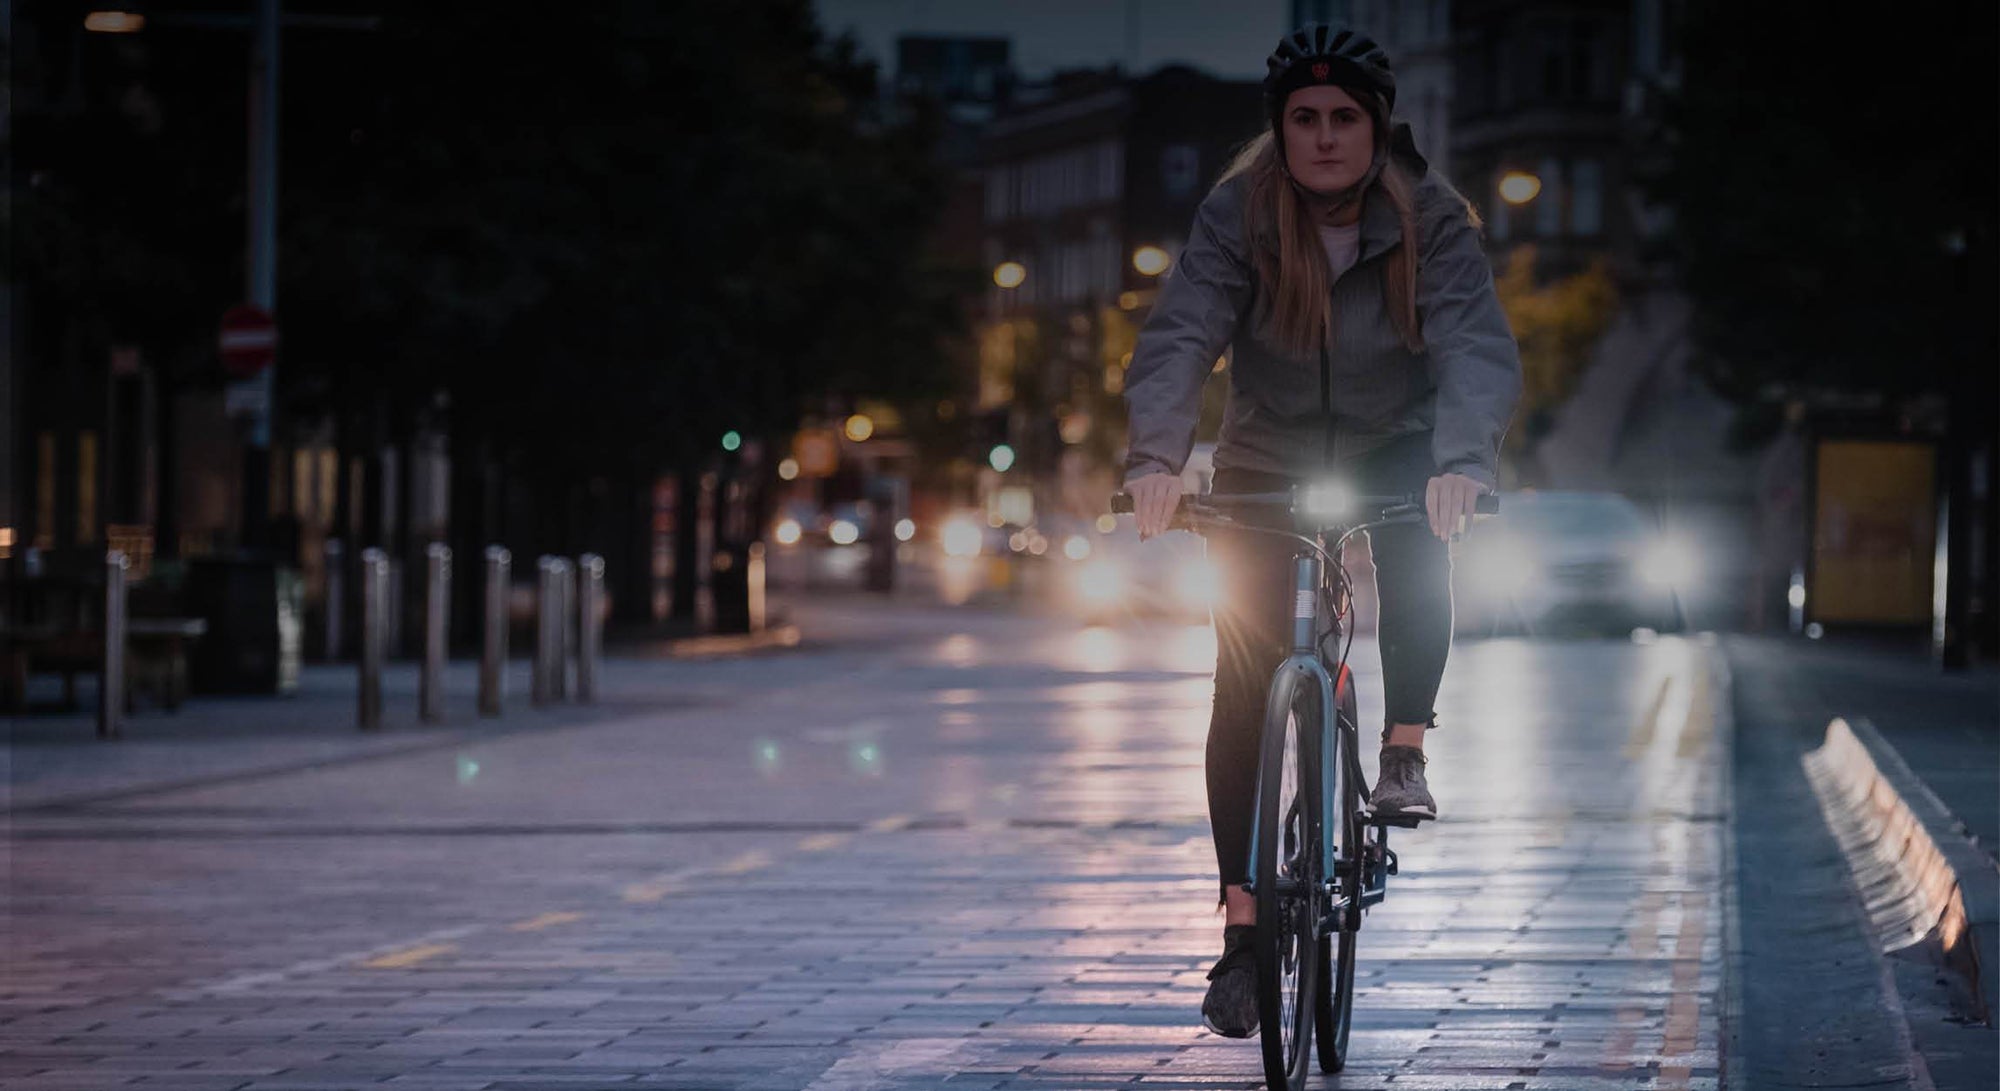 WOMEN CYCLISTS IN LONDON ARE MORE LIKELY TO CHOOSE DEDICATED CYCLE ROUTES THAN MEN